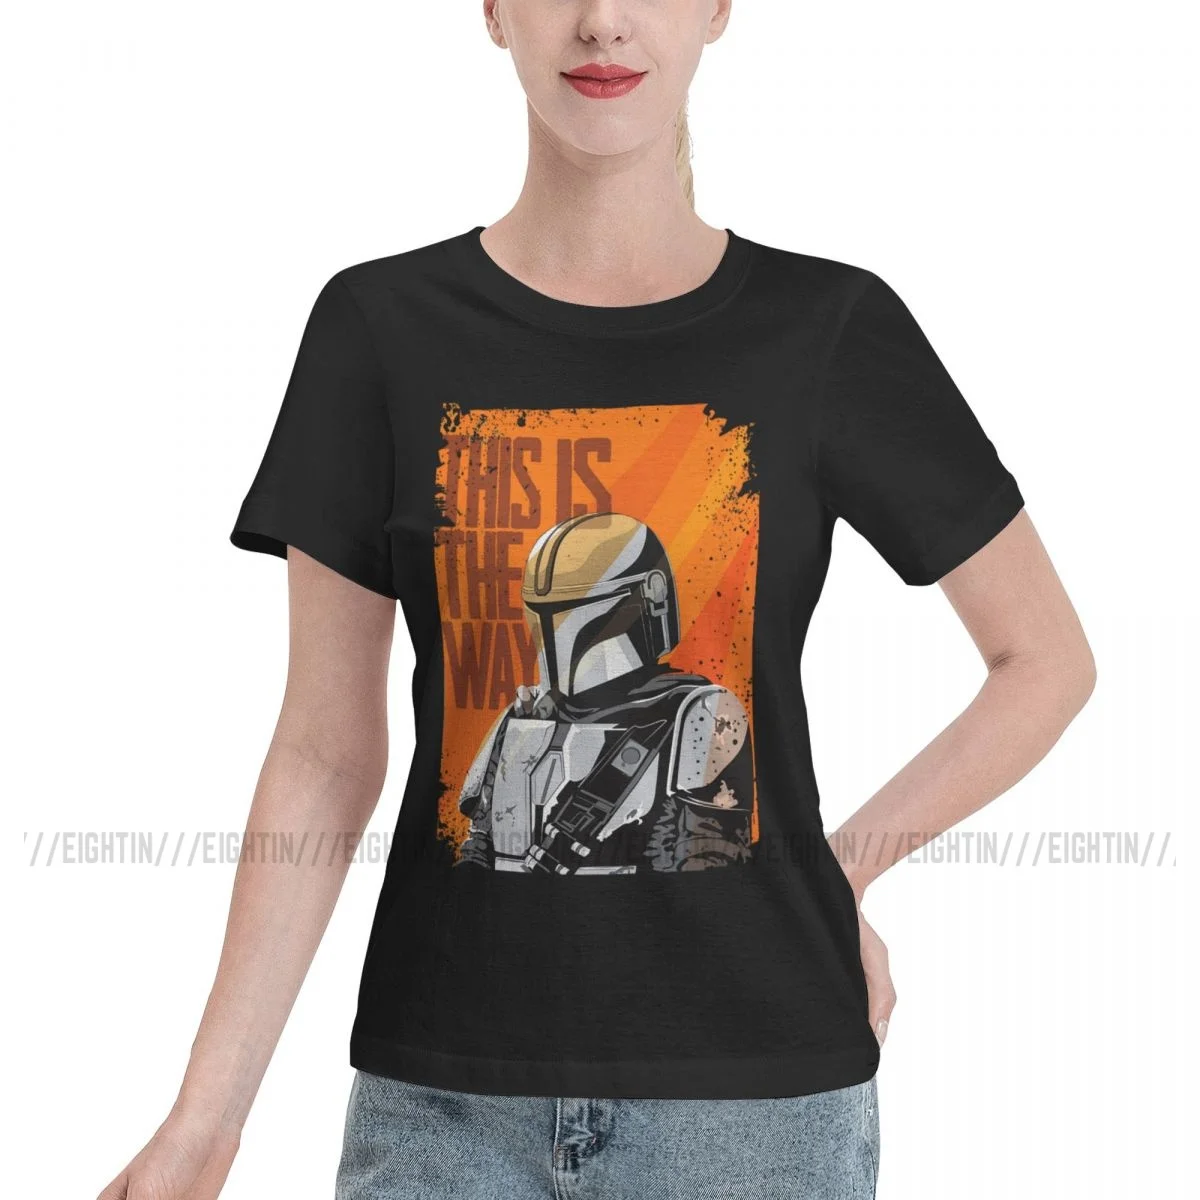 

This Is The Way Women Tshirt Mandalorian Baby Yoda Star Wars Tees Cotton T-shirts for Female O Neck Short Sleeve Punk Clothes